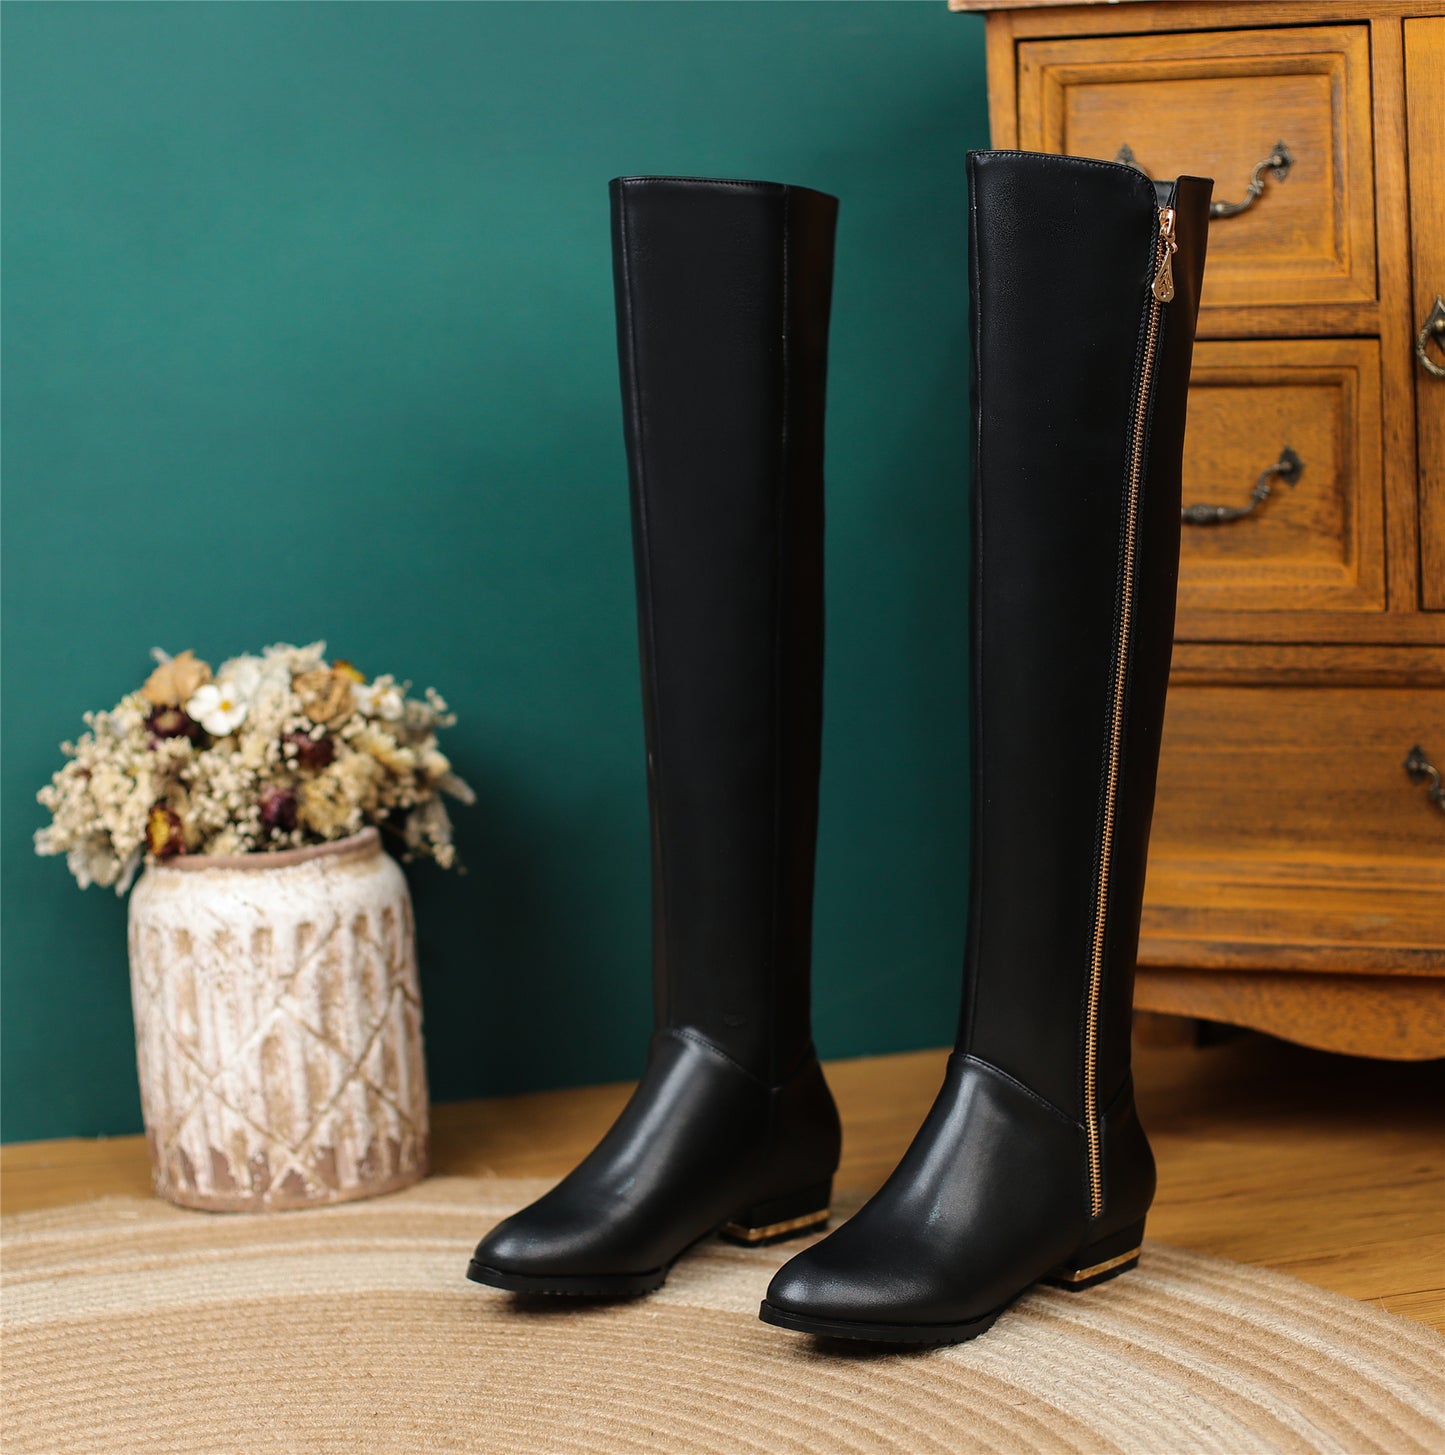 TinaCus Women's Genuine Leather Handmade Side Zipper Decor Pointed Toe Comfortable Low Heel Over the Knee High Boots